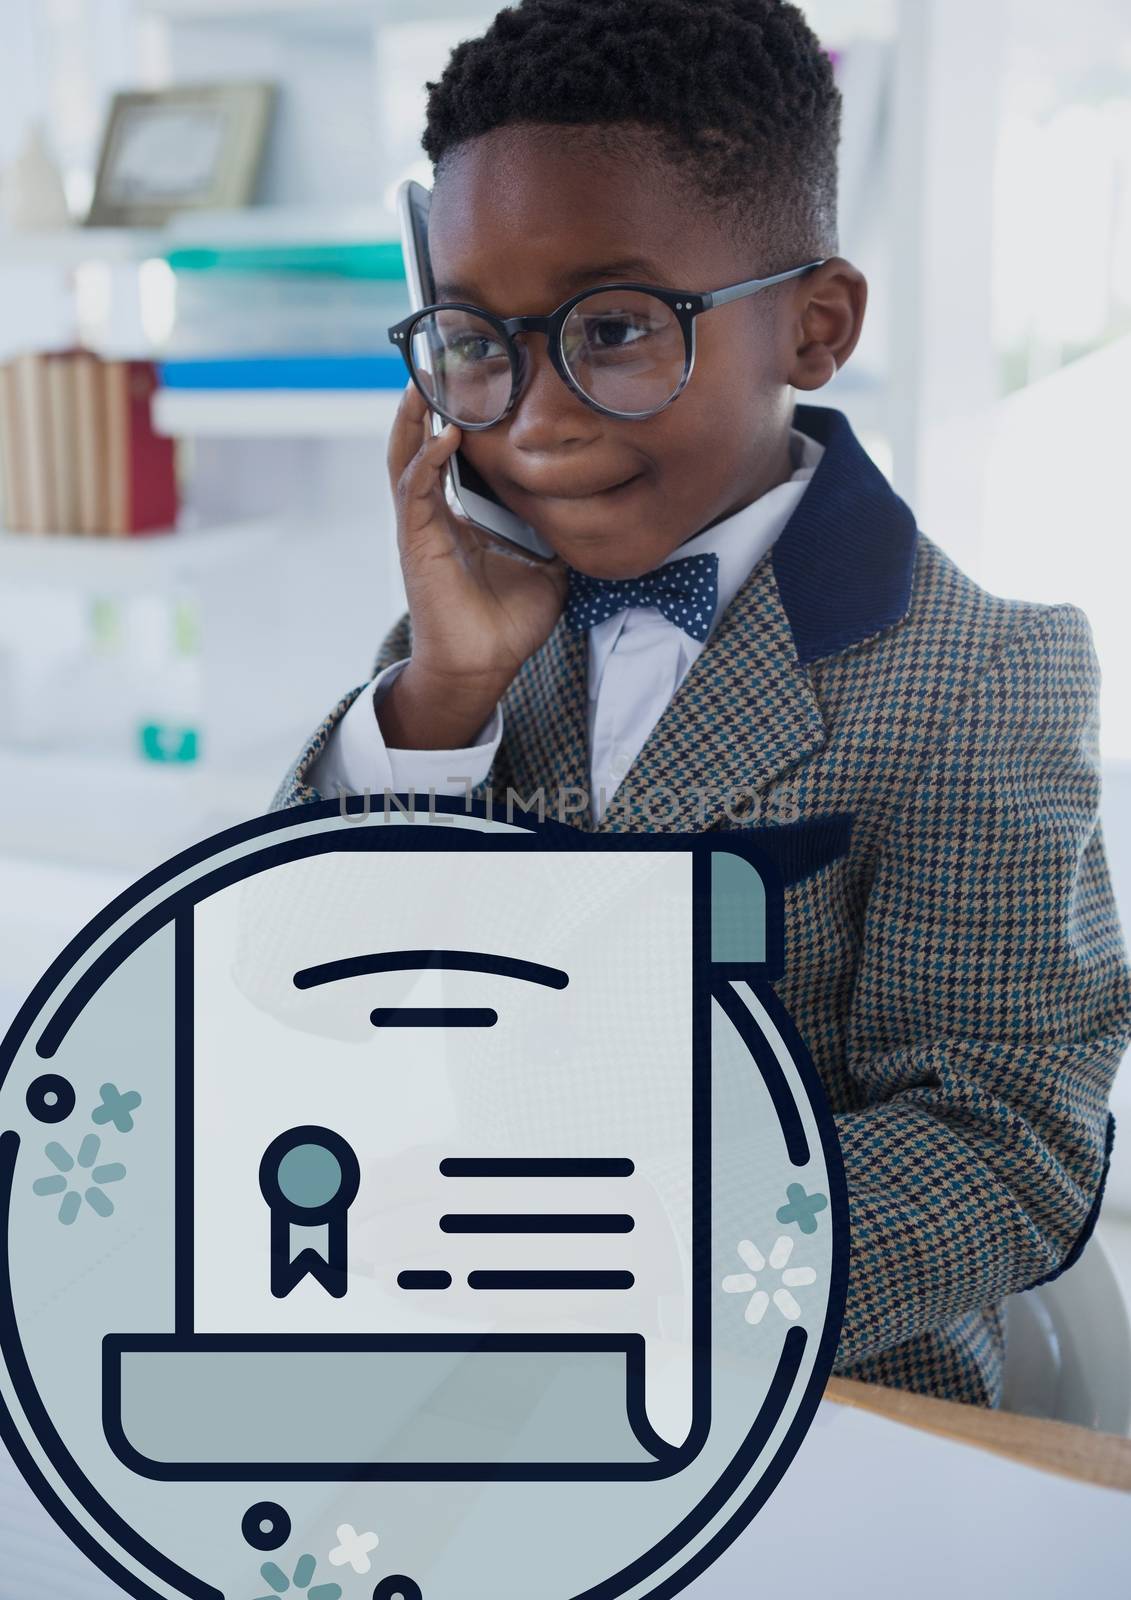 Digital composite of Education icons against office kid boy talking on the phone background